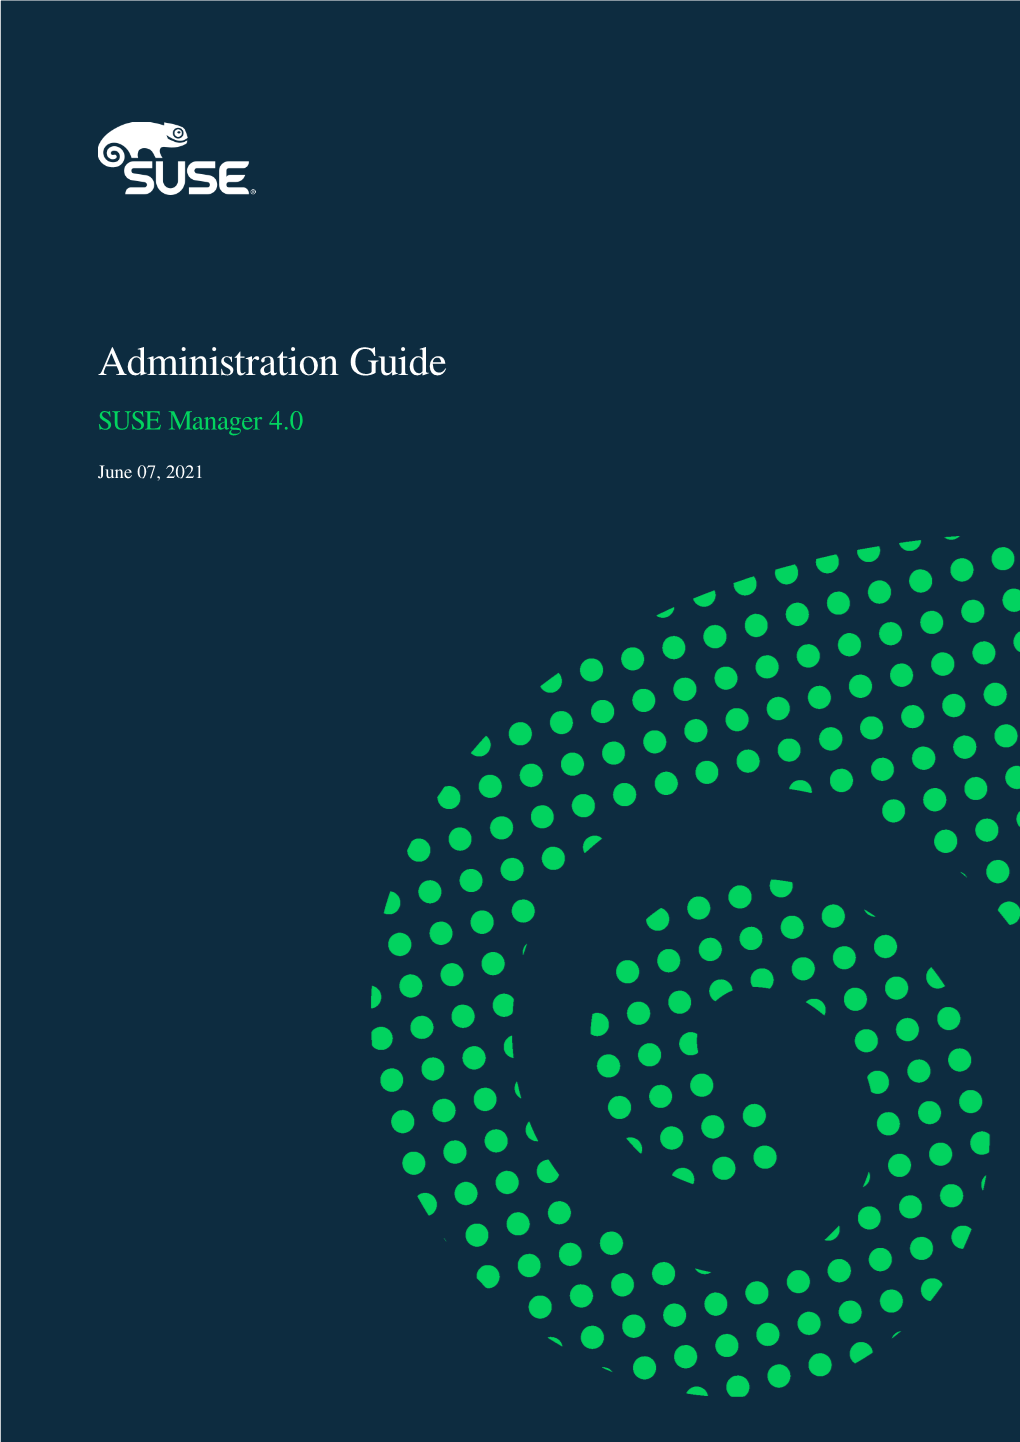 Administration Guide: SUSE Manager